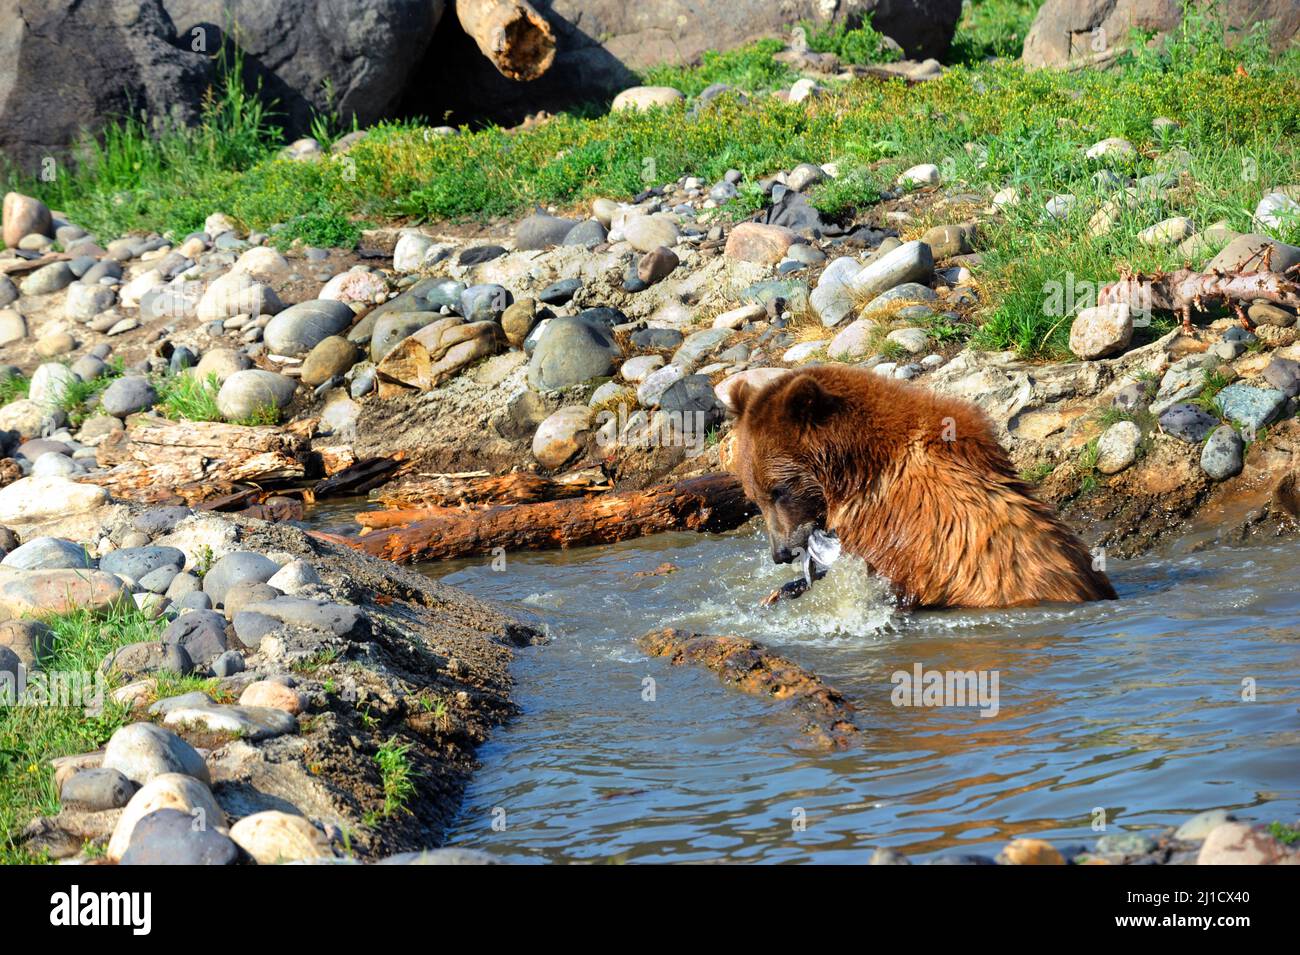 Young grizzly bear fights with a fish he has caught.  He is fishing in a stream and has a fish in his mouth. Stock Photo